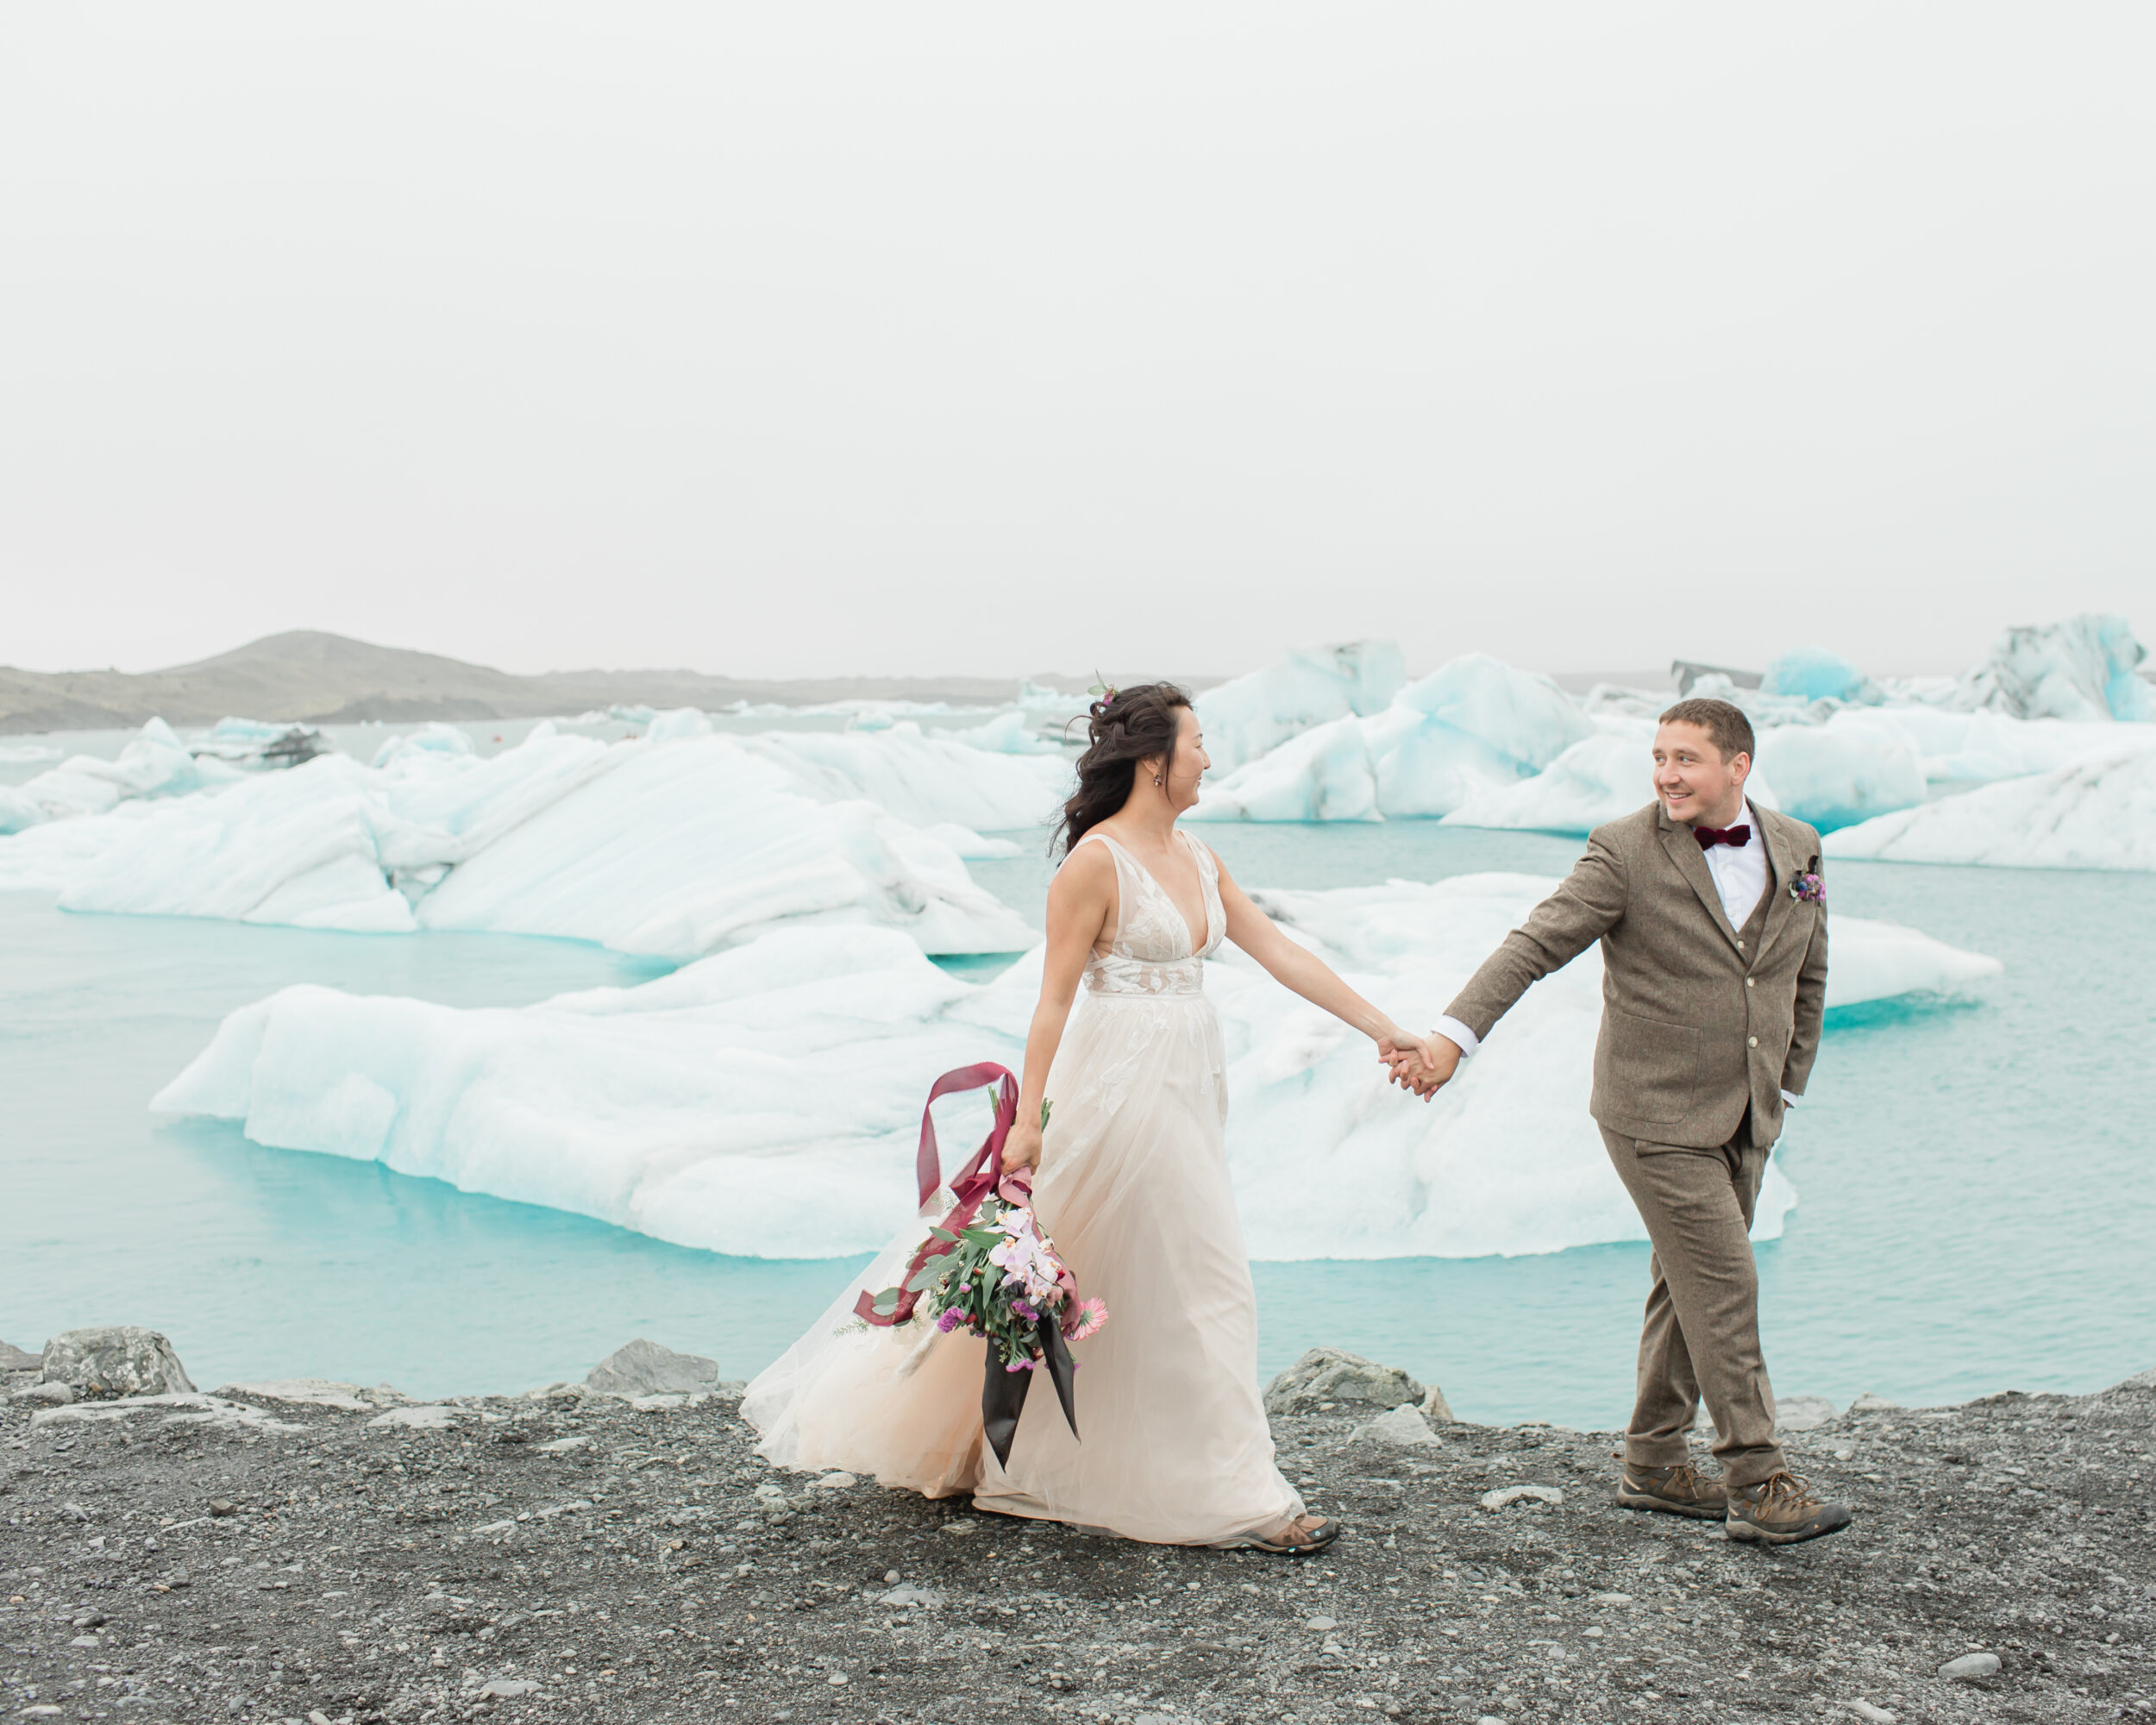 A couple walks hand in hand wearing elopement attire in Iceland.